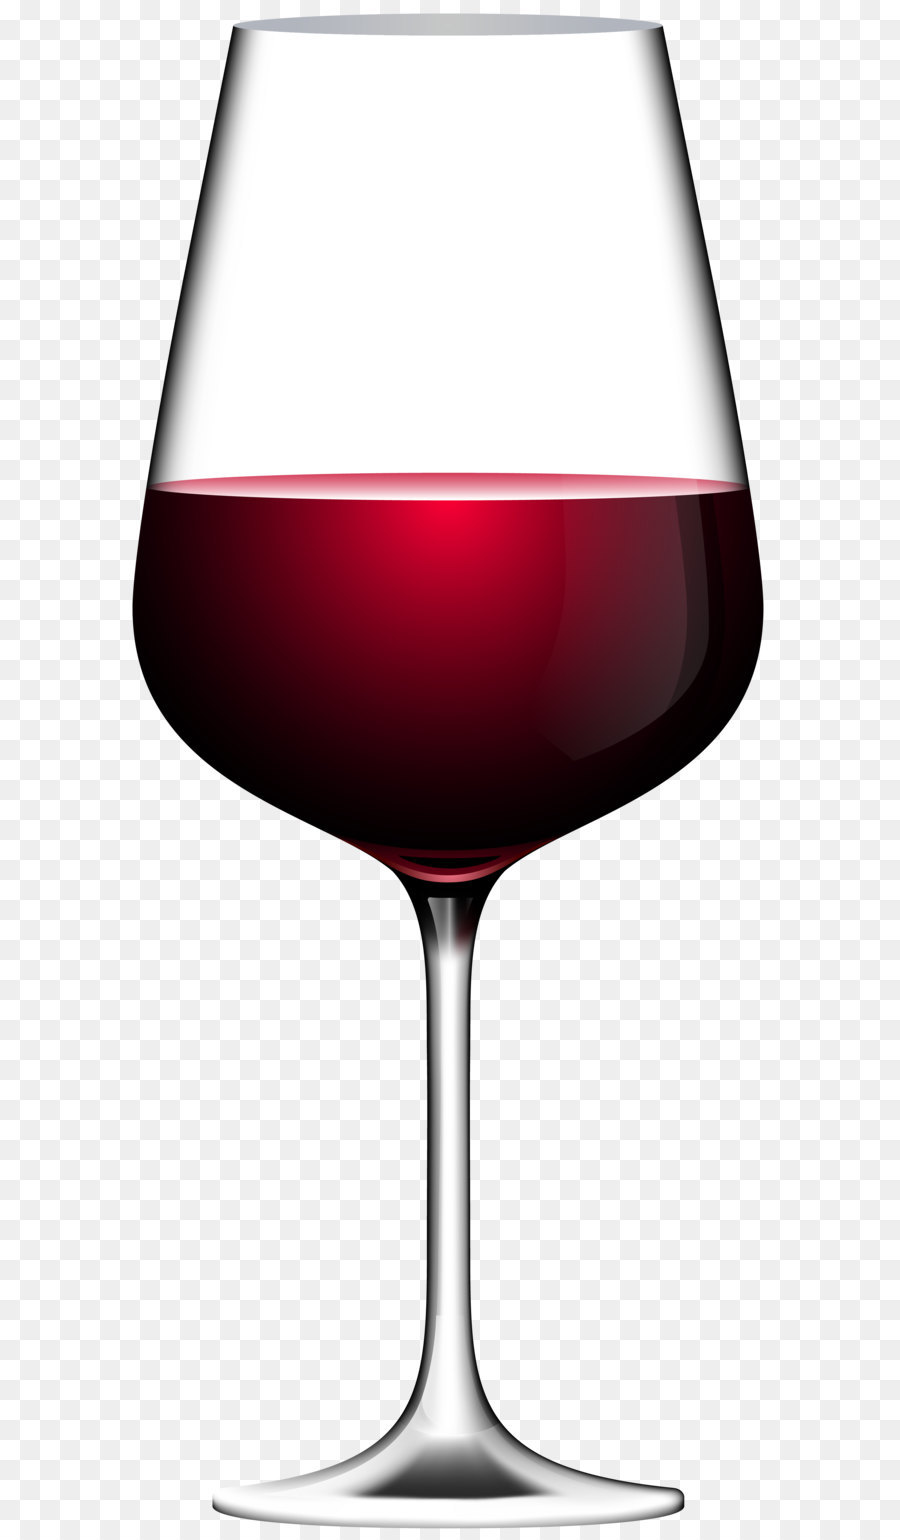 Red Wine Champagne Wine glass Clip art - Red Wine Glass Transparent Clip Art Image png download - 3384*8000 - Free Transparent Red Wine png Download.